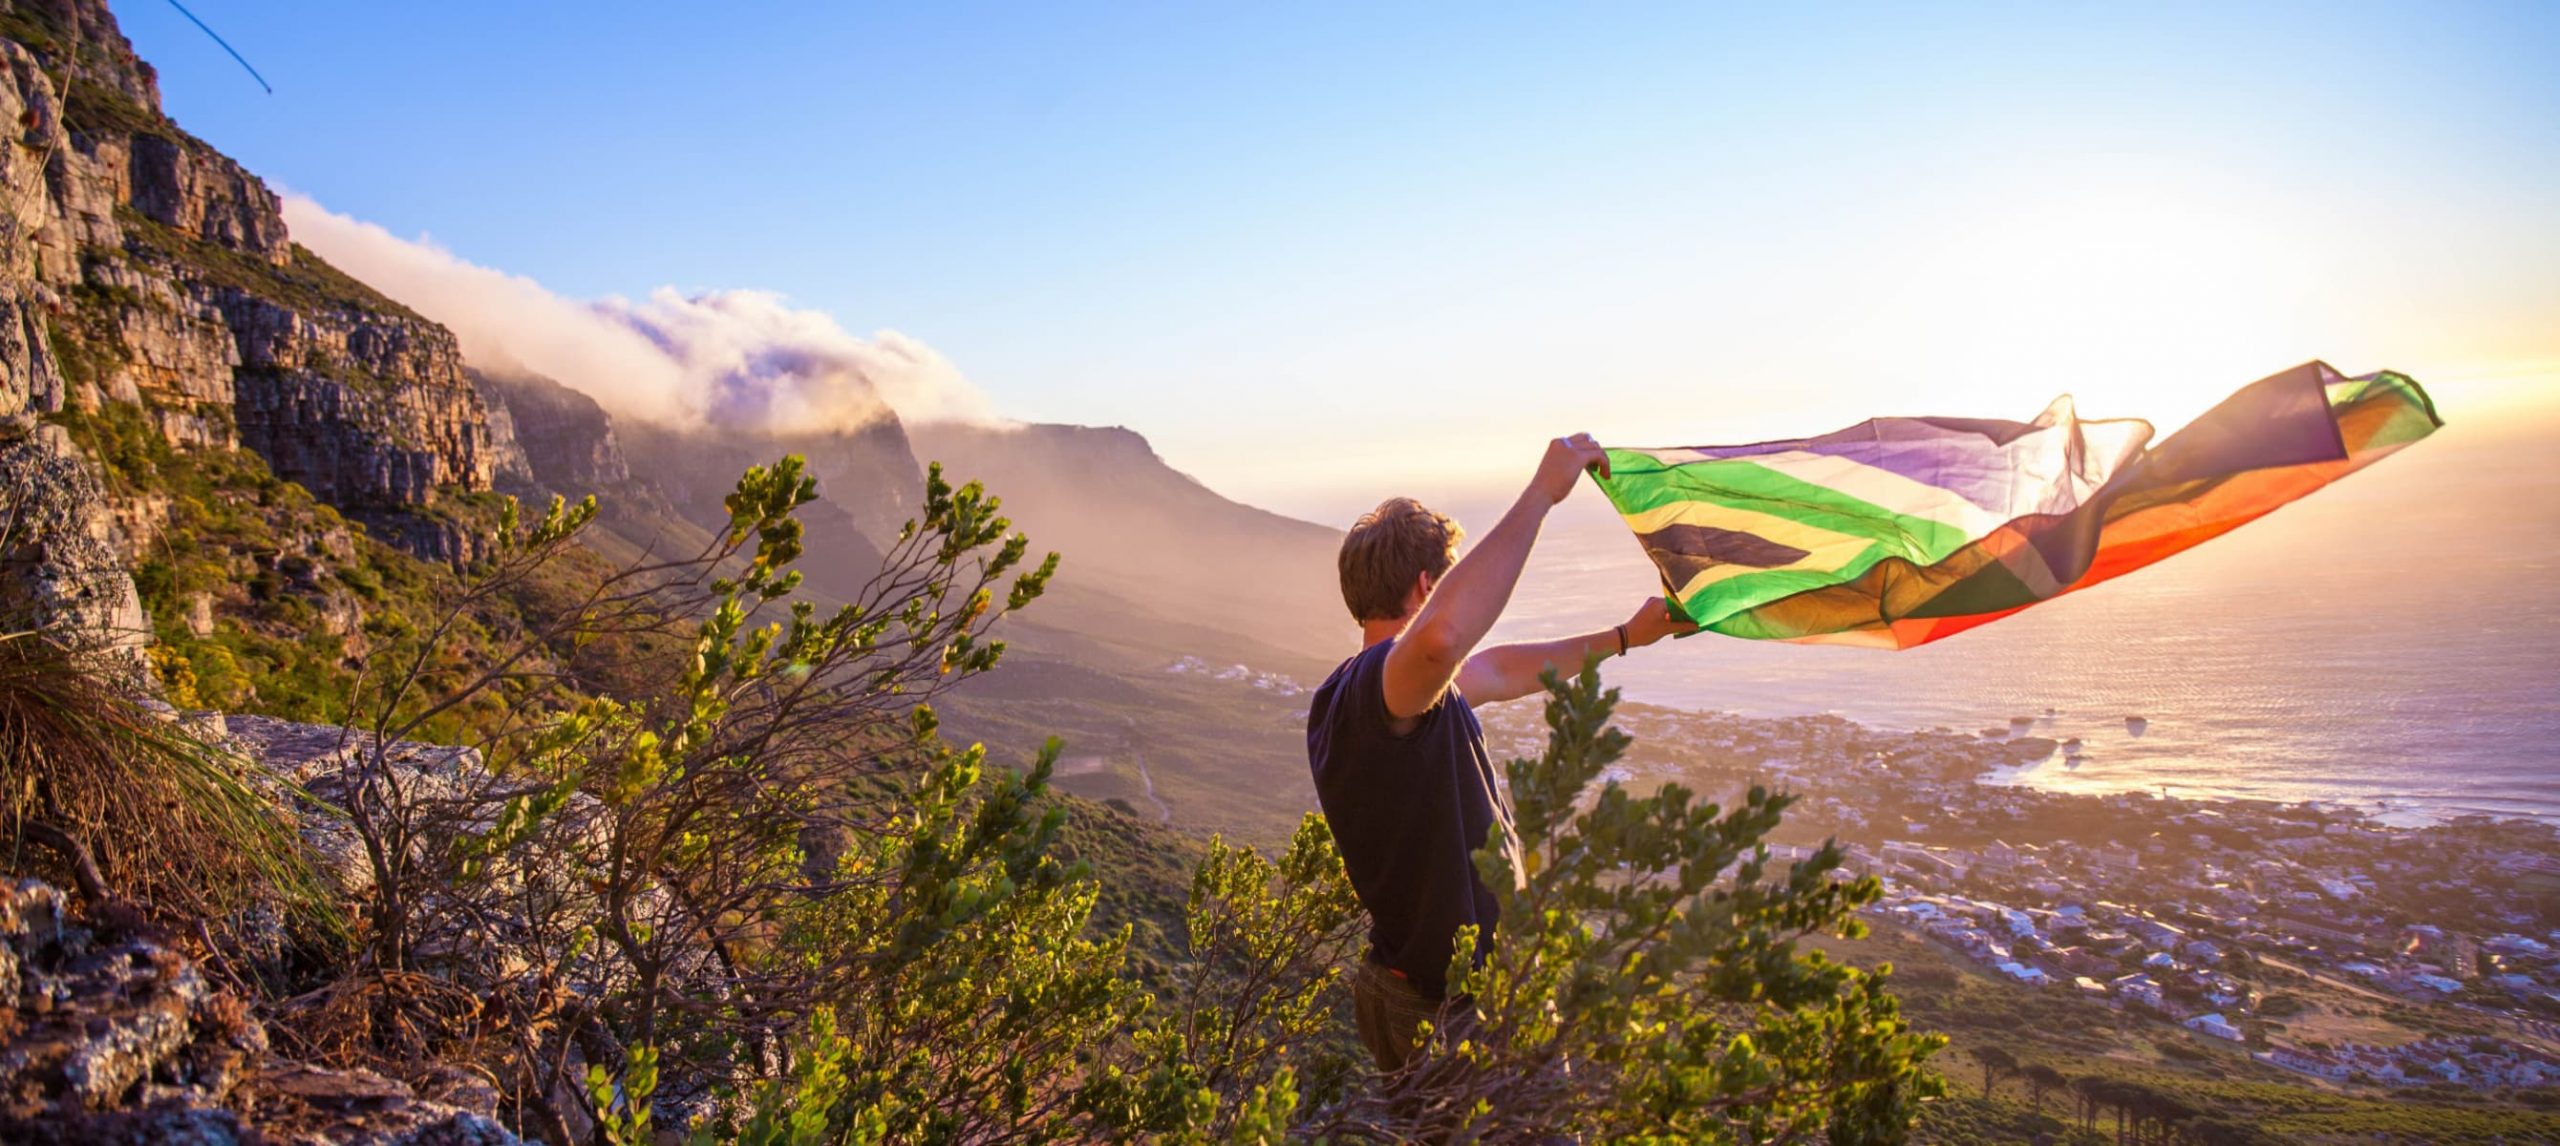 9 Best Things To Do In Cape Town, South Africa